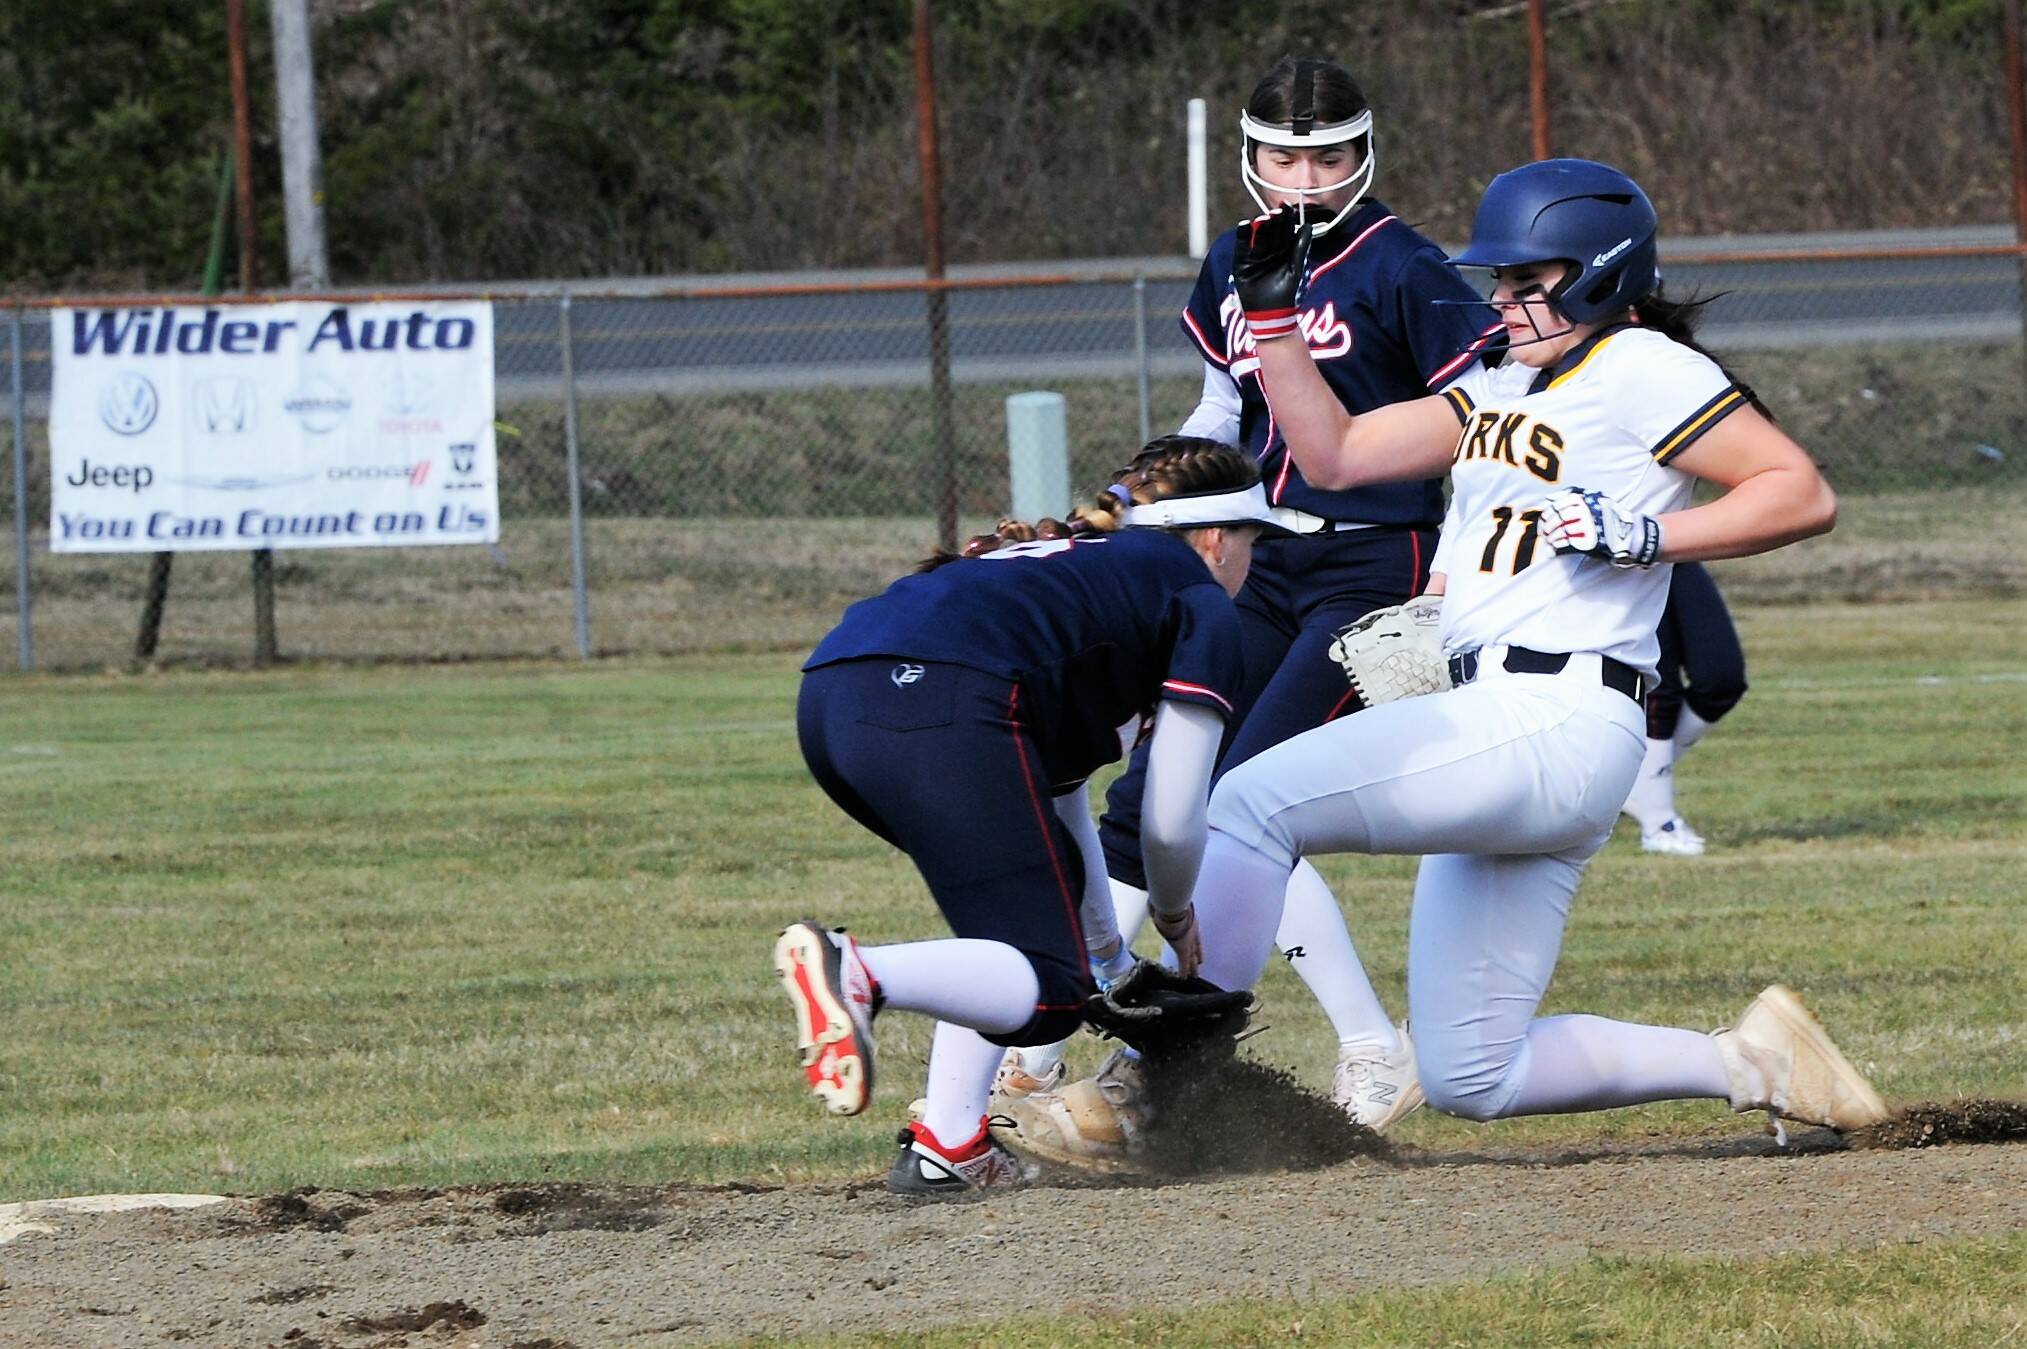 Kaidence Rigby steals second.